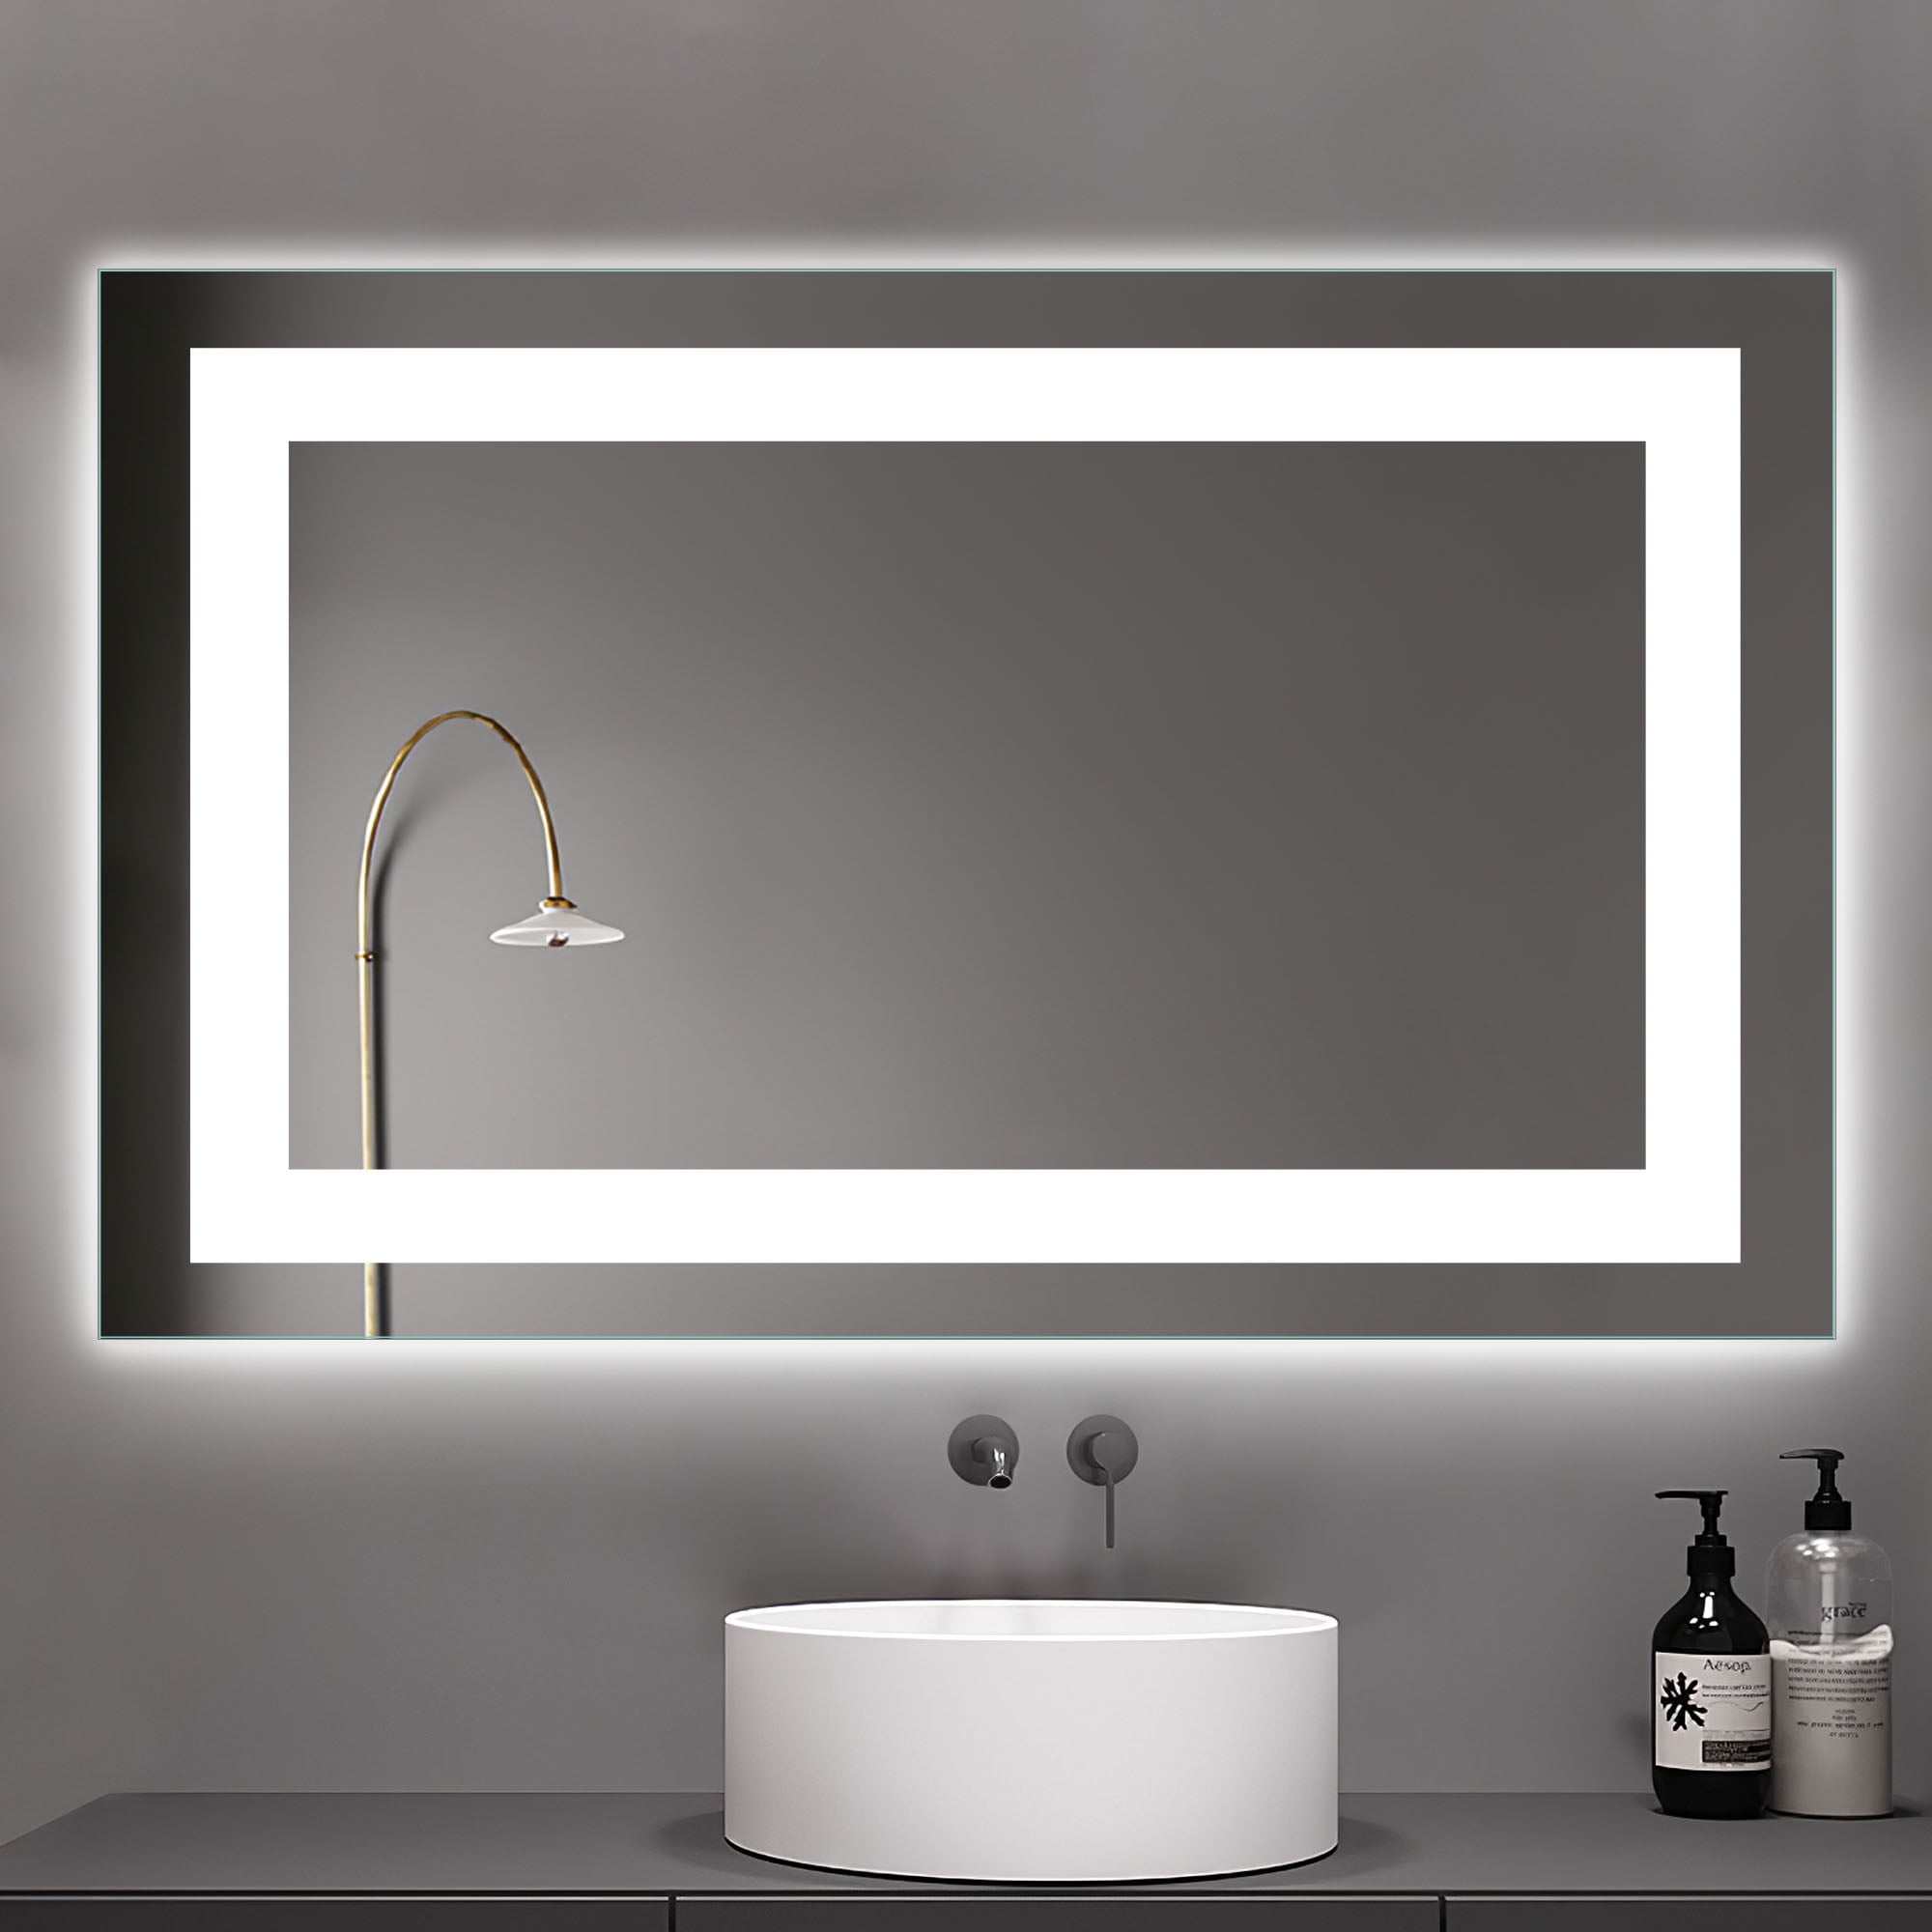 Details about   36" LED Bathroom Wall Mirrors w/ Illuminated Light Lighted Makeup Vanity Mirror 